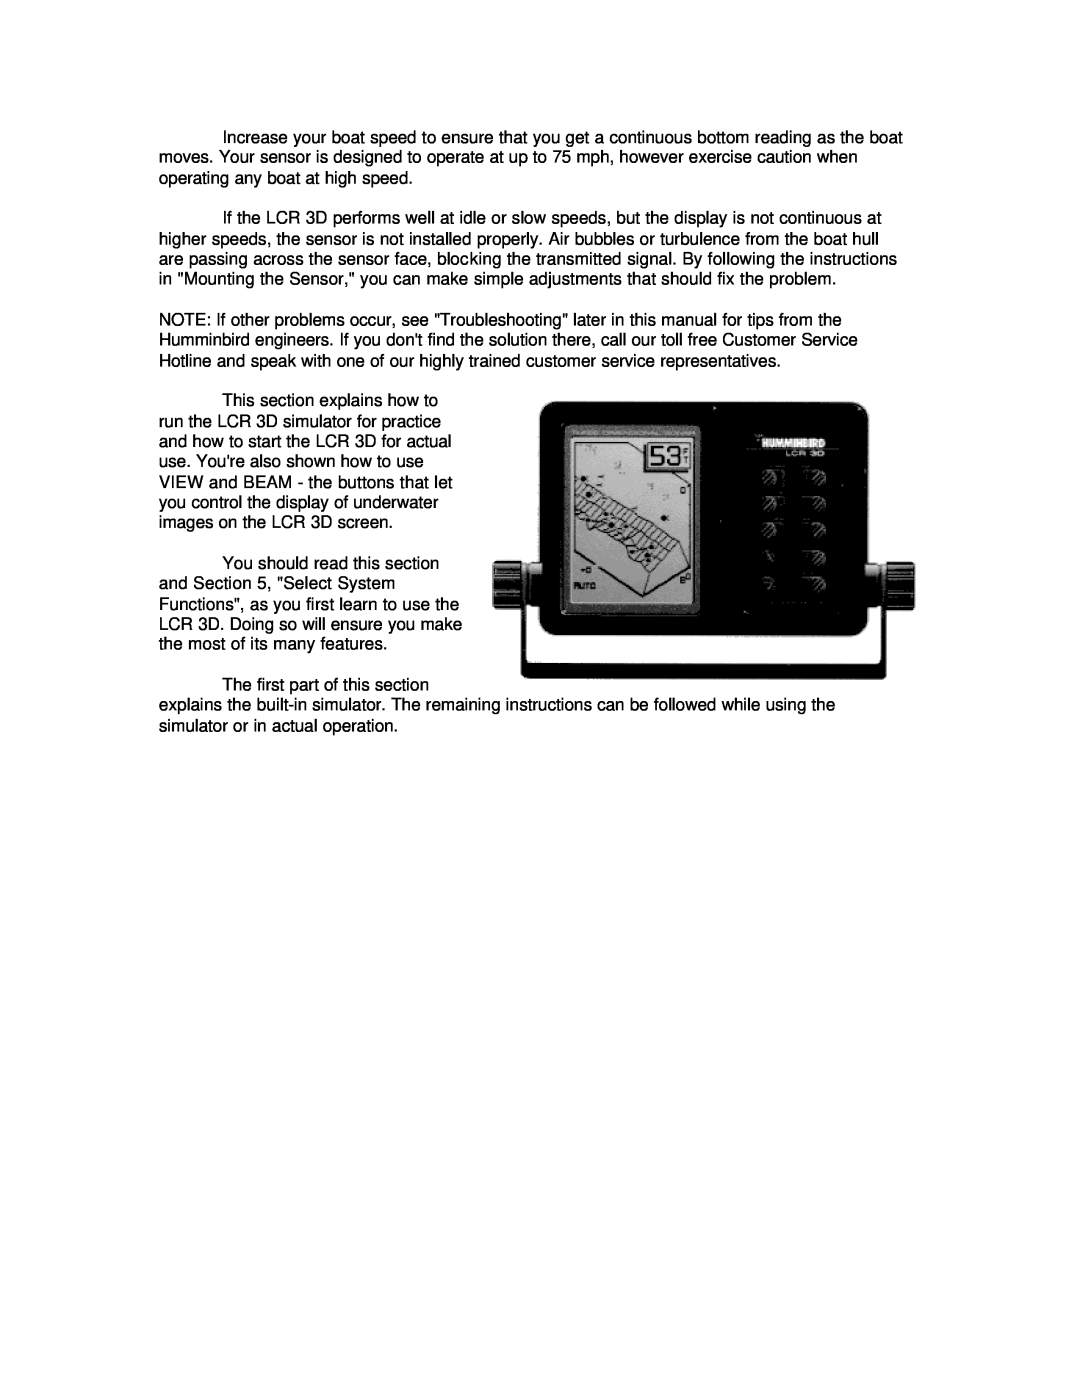 Humminbird LCR 3D manual The first part of this section 